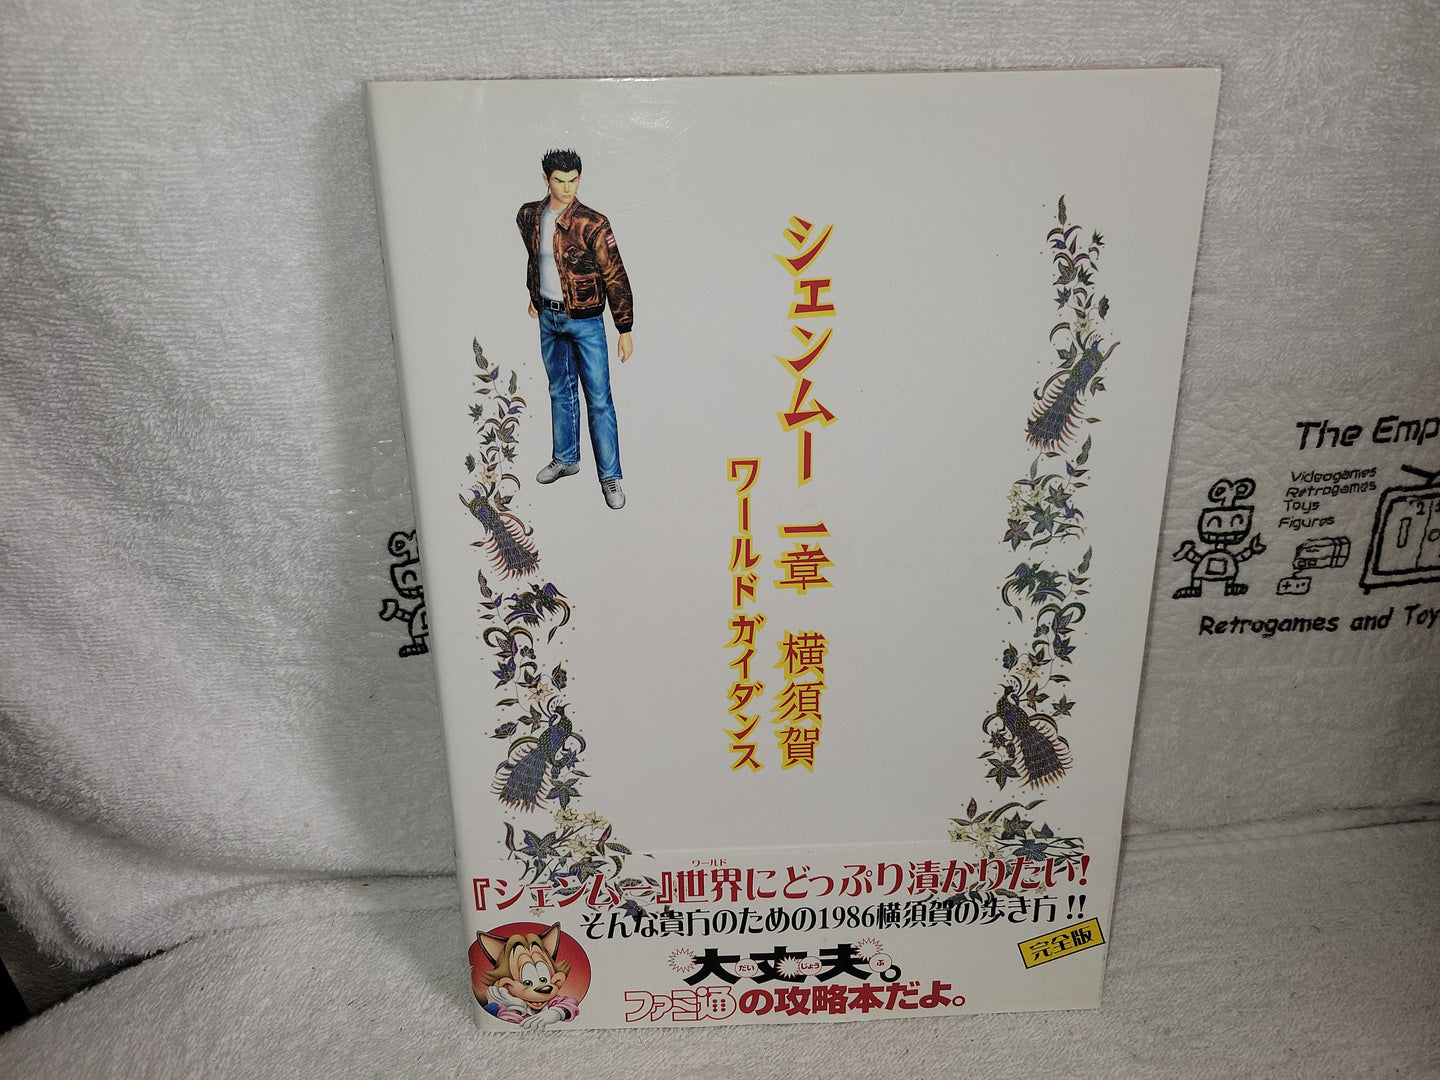 sergio - Shenmue chapter 1 book guide MOOK